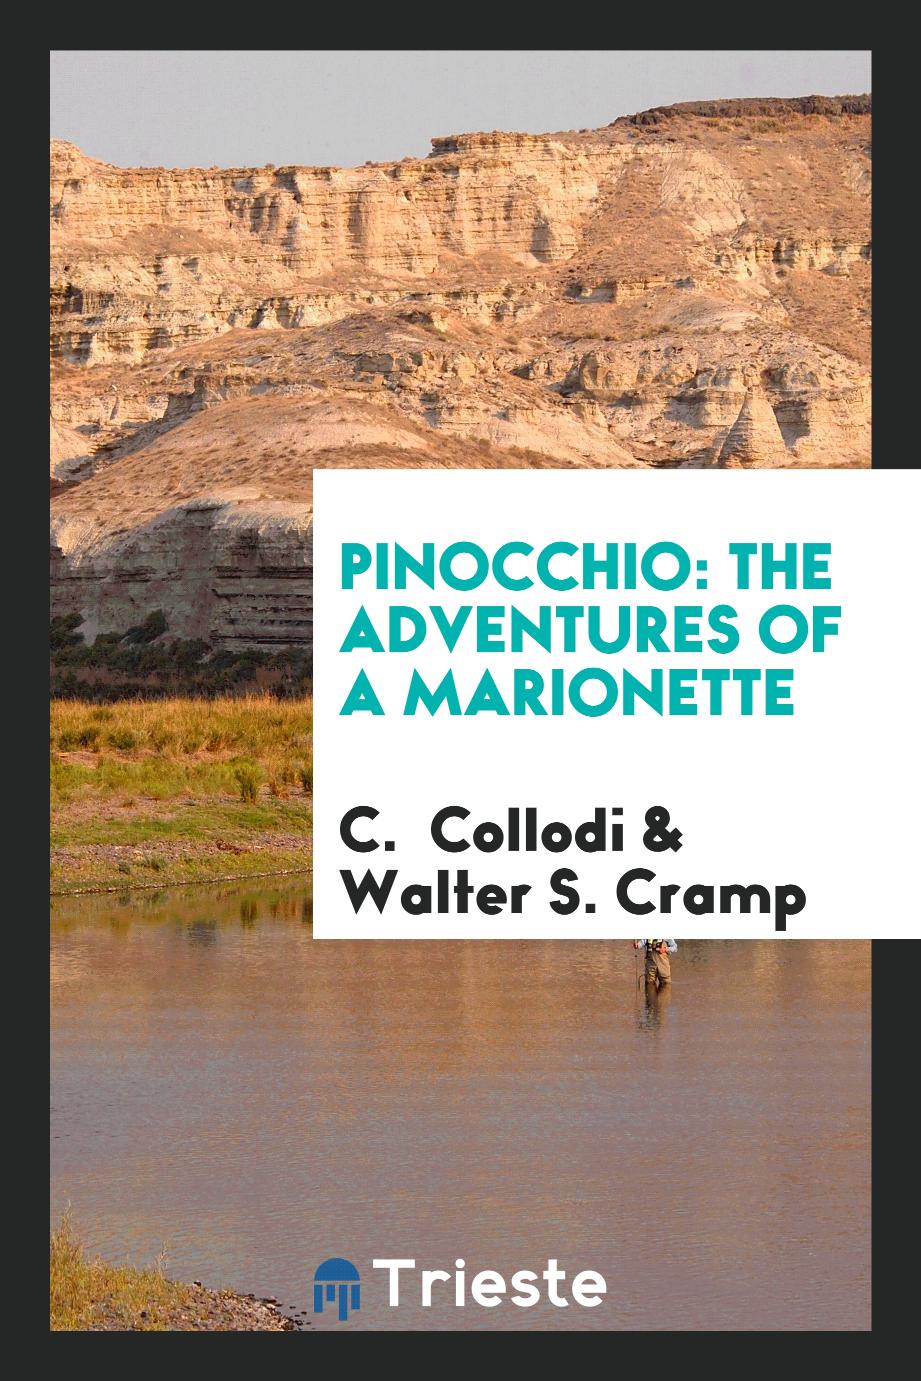 Pinocchio: The Adventures of a Marionette